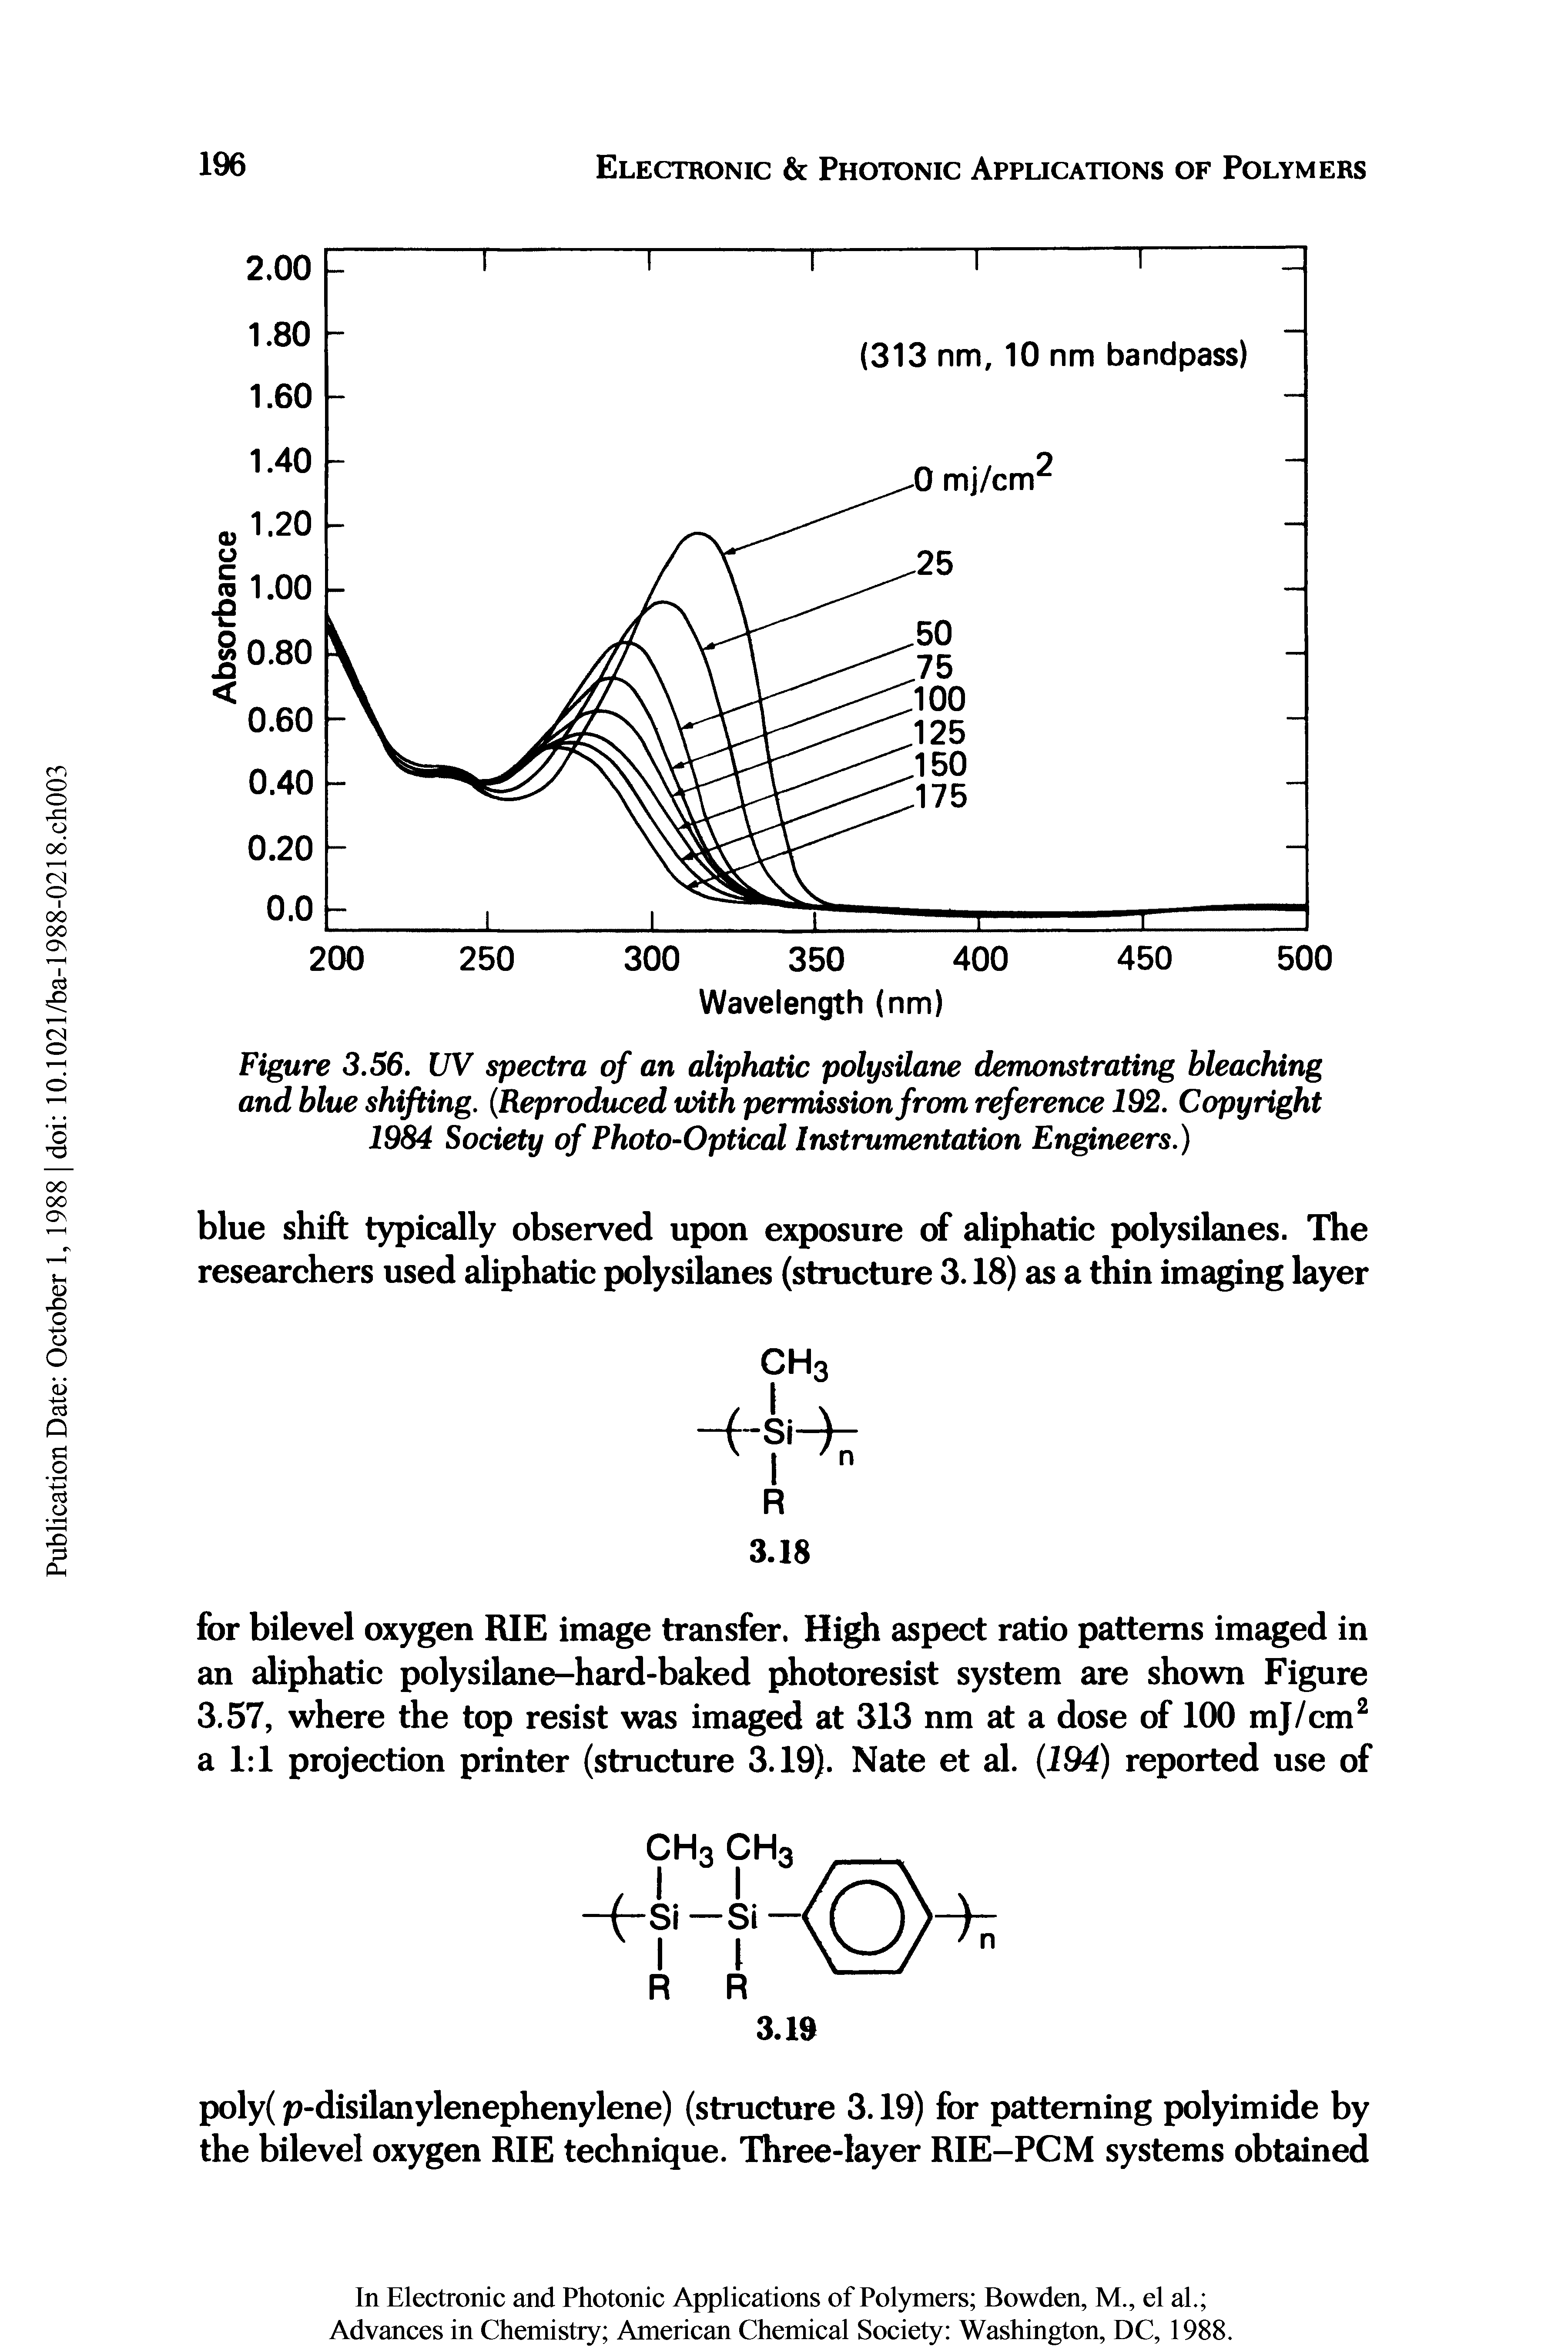 Figure 3.56. UV spectra of an aliphatic poly silane demonstrating bleaching and blue shifting. Reproduced with permission from reference 192. Copyright 1984 Society of Photo-Optical Instrumentation Engineers.)...